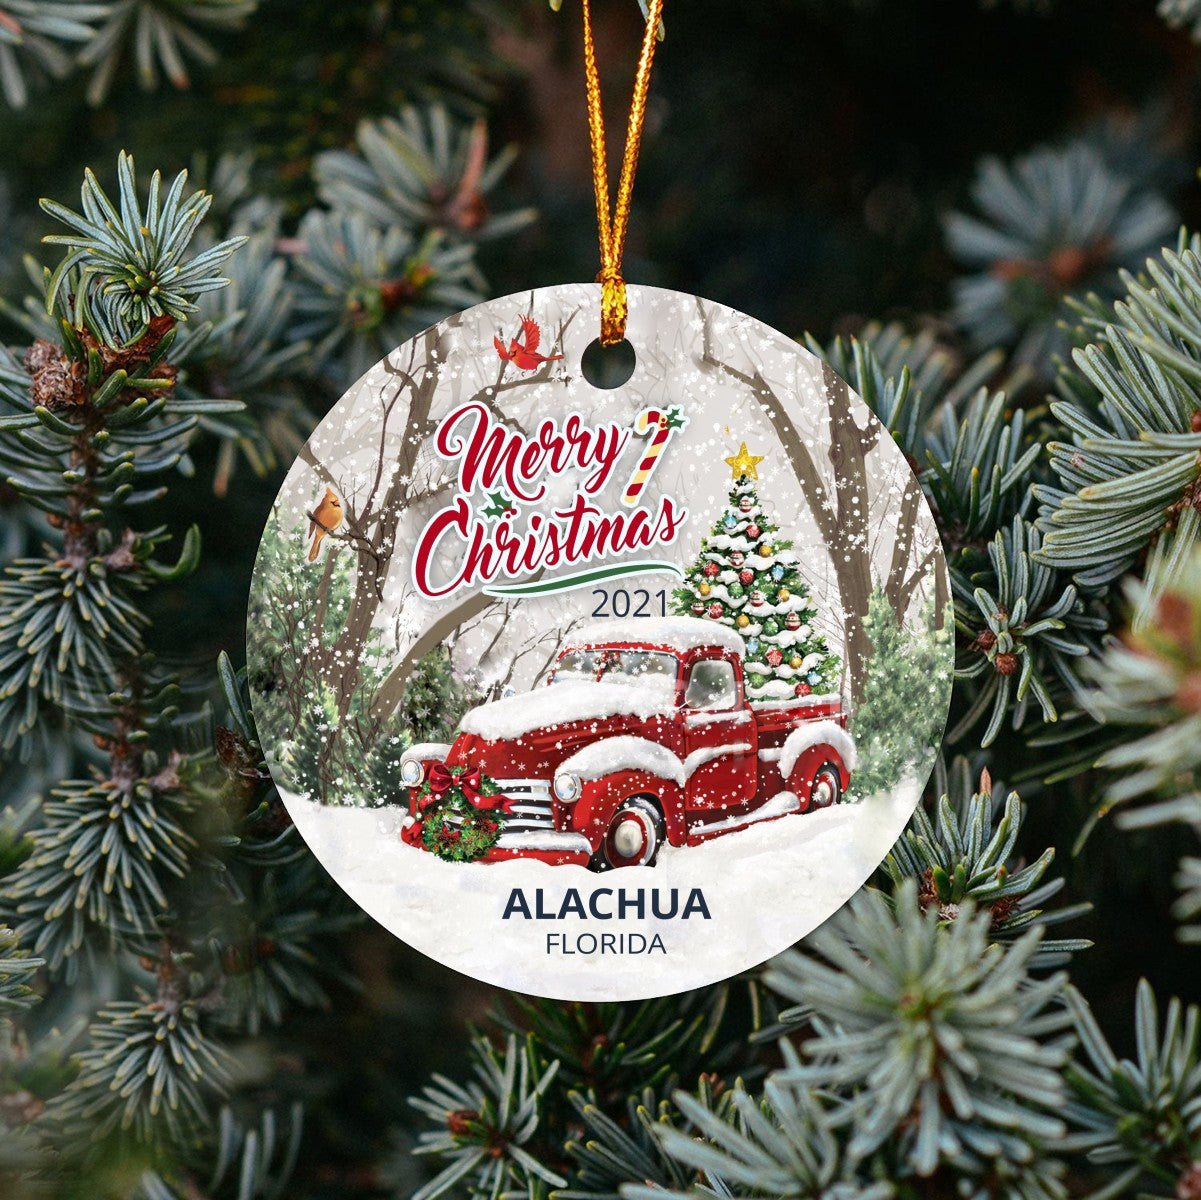 Christmas Tree Ornaments Alachua - Ornament With Name City, State Alachua Florida FL Ornament - Red Truck Xmas Ornaments 3'' Plastic Gift For Family, Friend And Housewarming